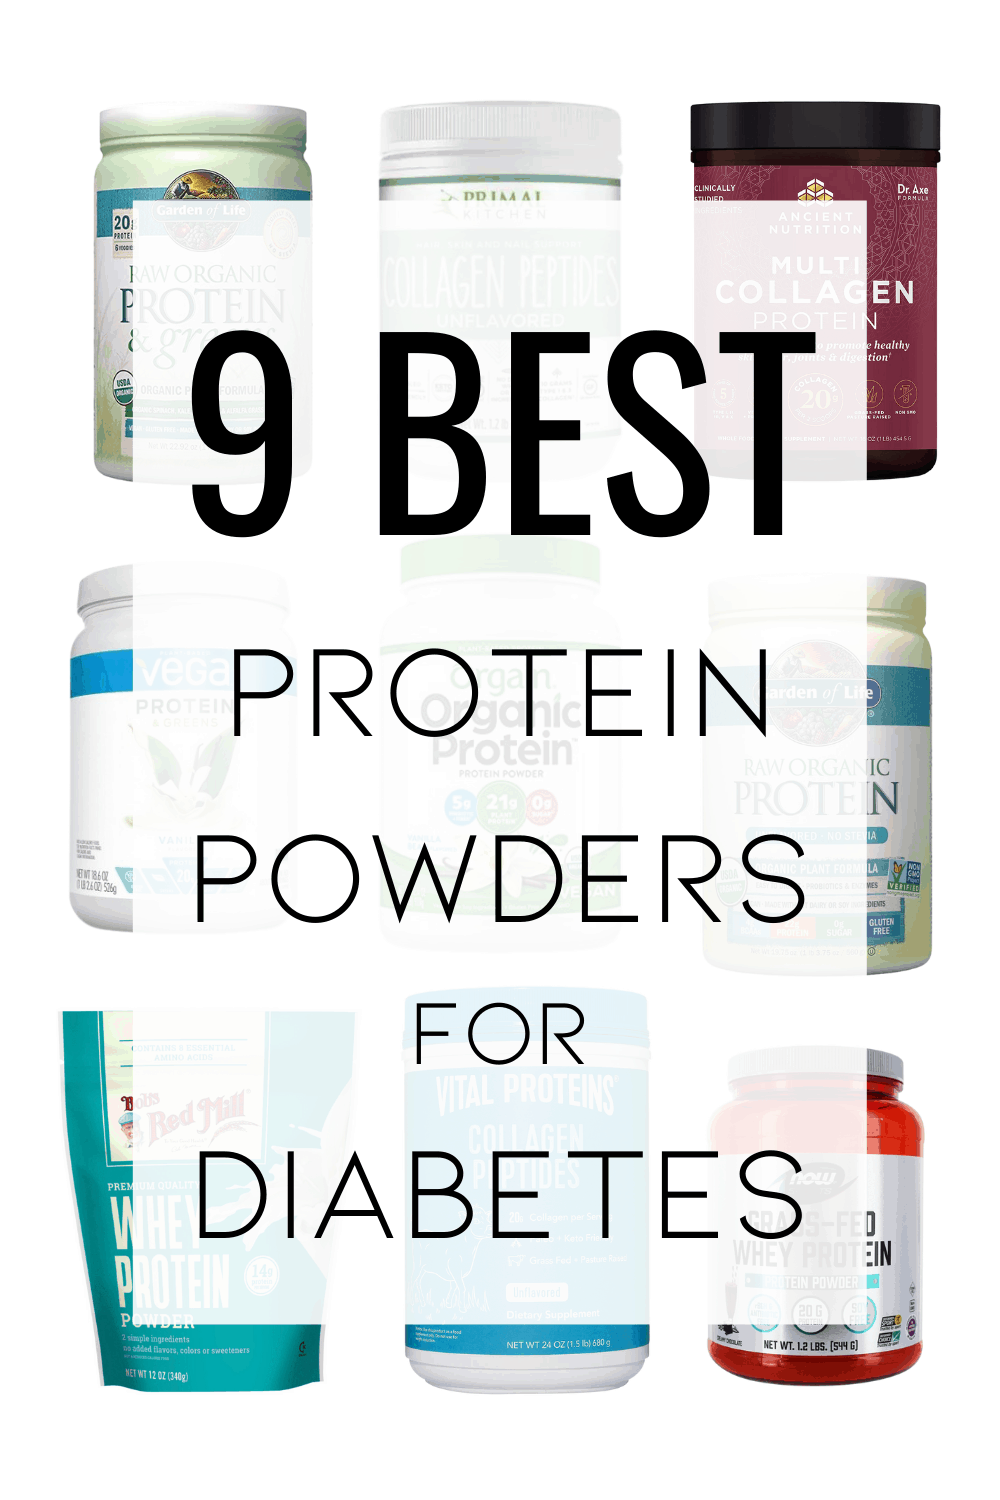 The 9 Best Protein Powders for Diabetes | Milk & Honey Nutrition